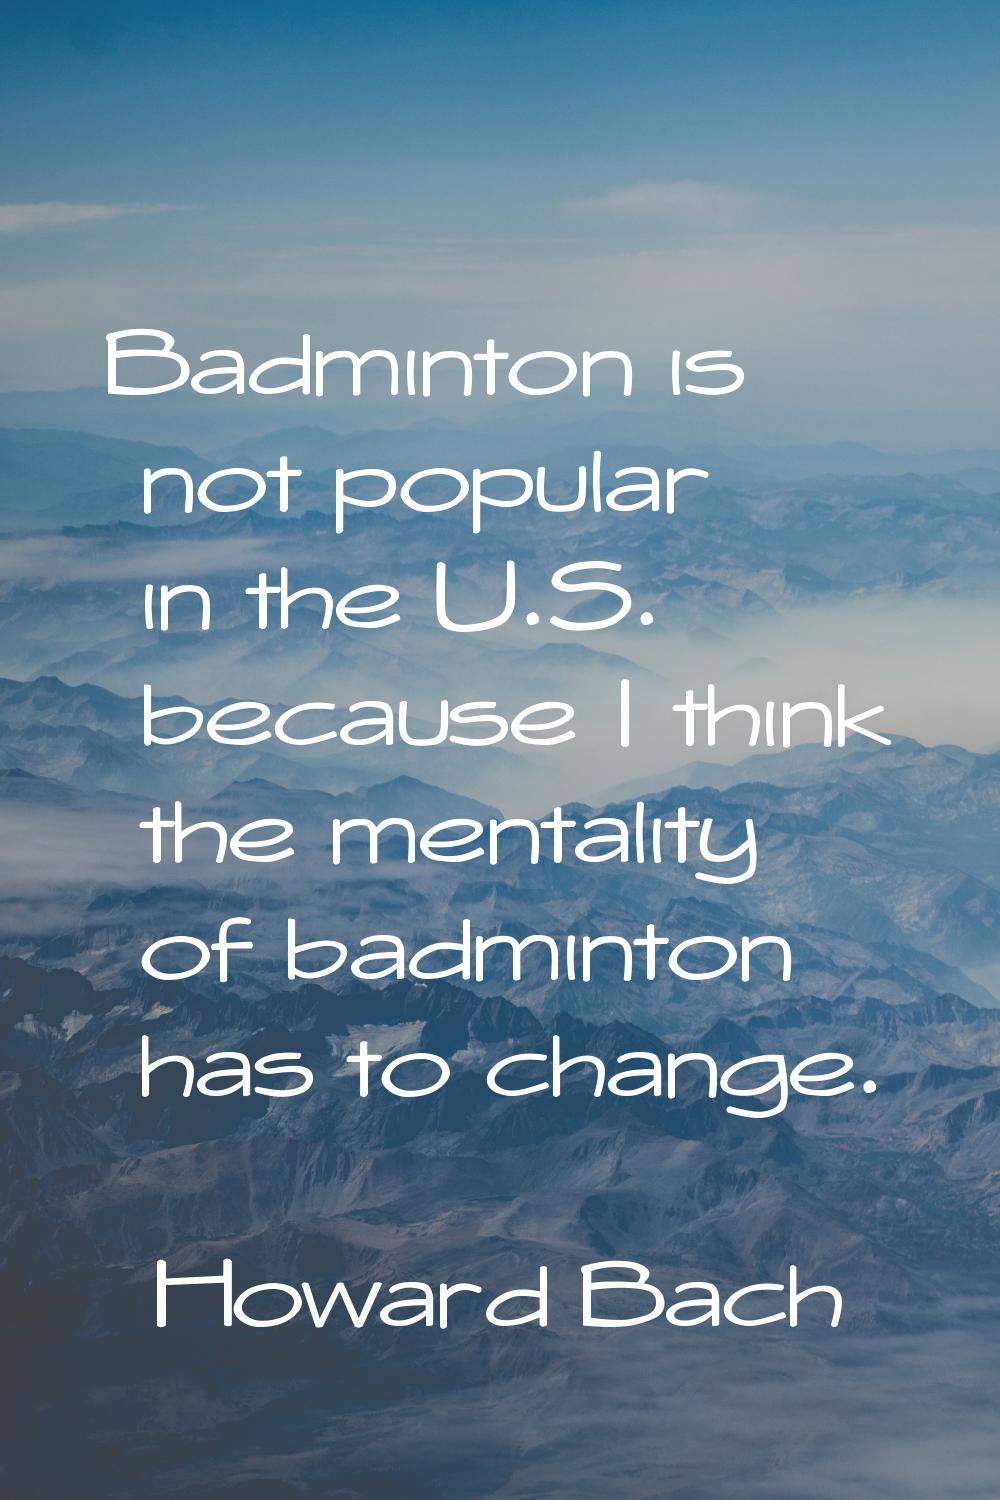 Badminton is not popular in the U.S. because I think the mentality of badminton has to change.